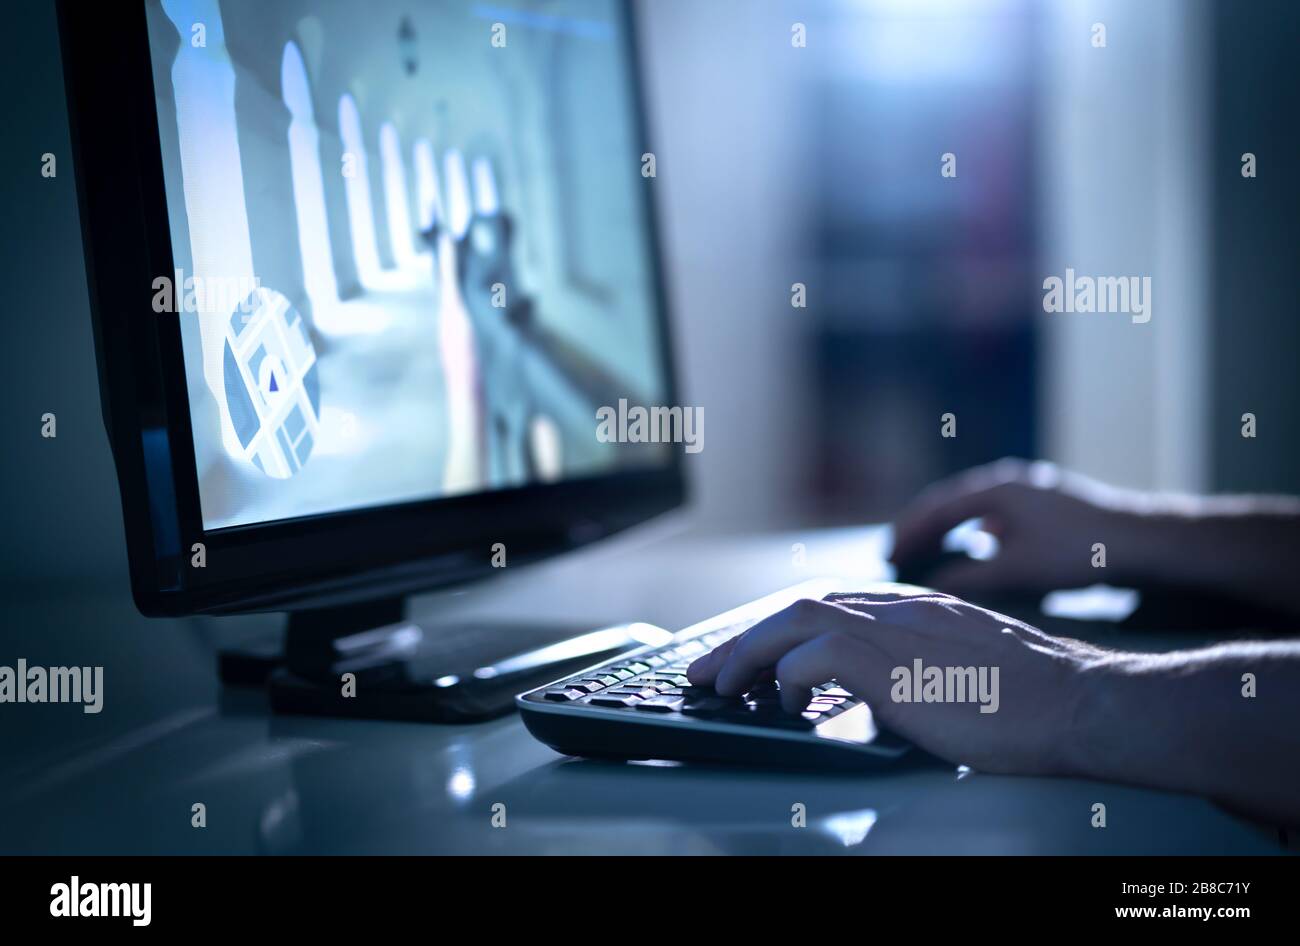 Man playing fps video game with desktop computer. E sports professional in competitive event. Team strategy and battle videogame streaming. Stock Photo